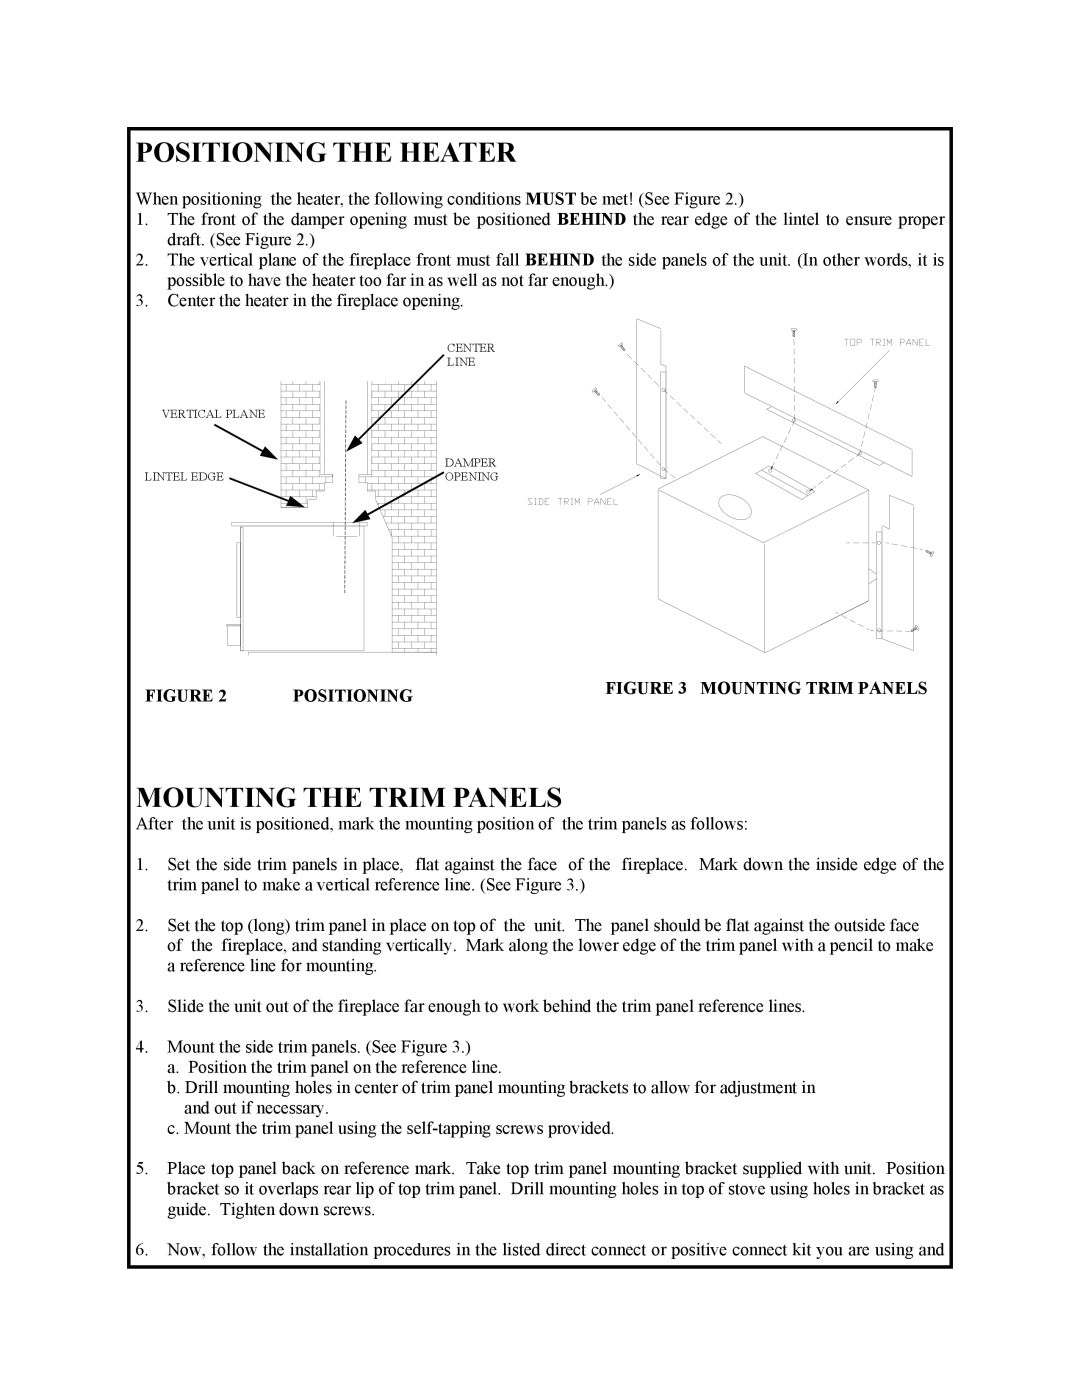 New Buck Corporation 91 manual Positioning The Heater, Mounting The Trim Panels, Mounting Trim Panels 